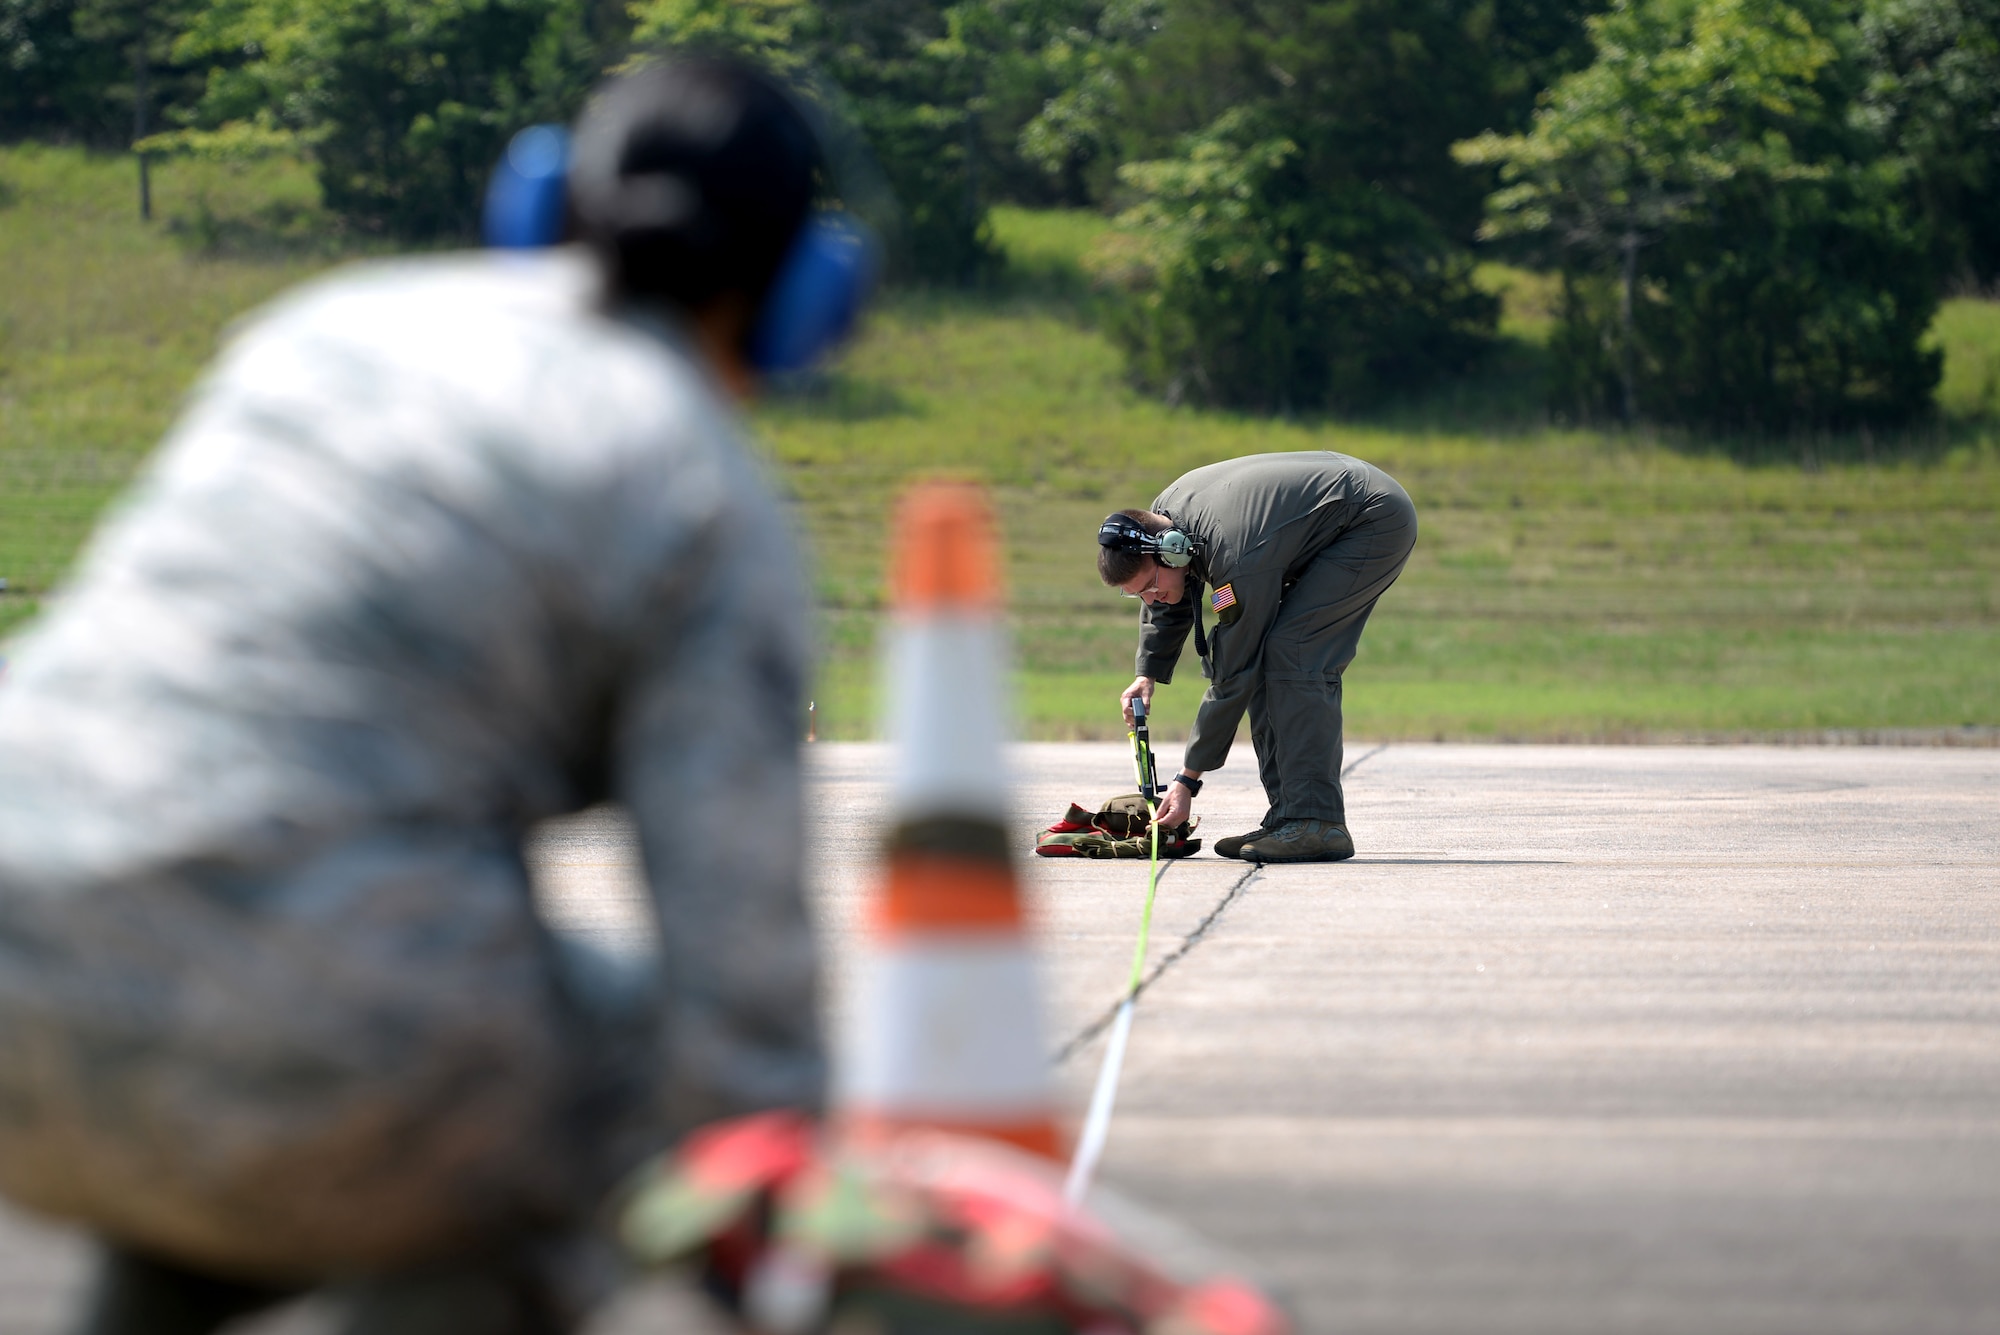 A woman wearing the Airman Battle Uniform with blue ear covers holding down a measuring tape at an orange cone while a man wearing a green flight suit pulls the other end of the measuring tape to a sand bag.